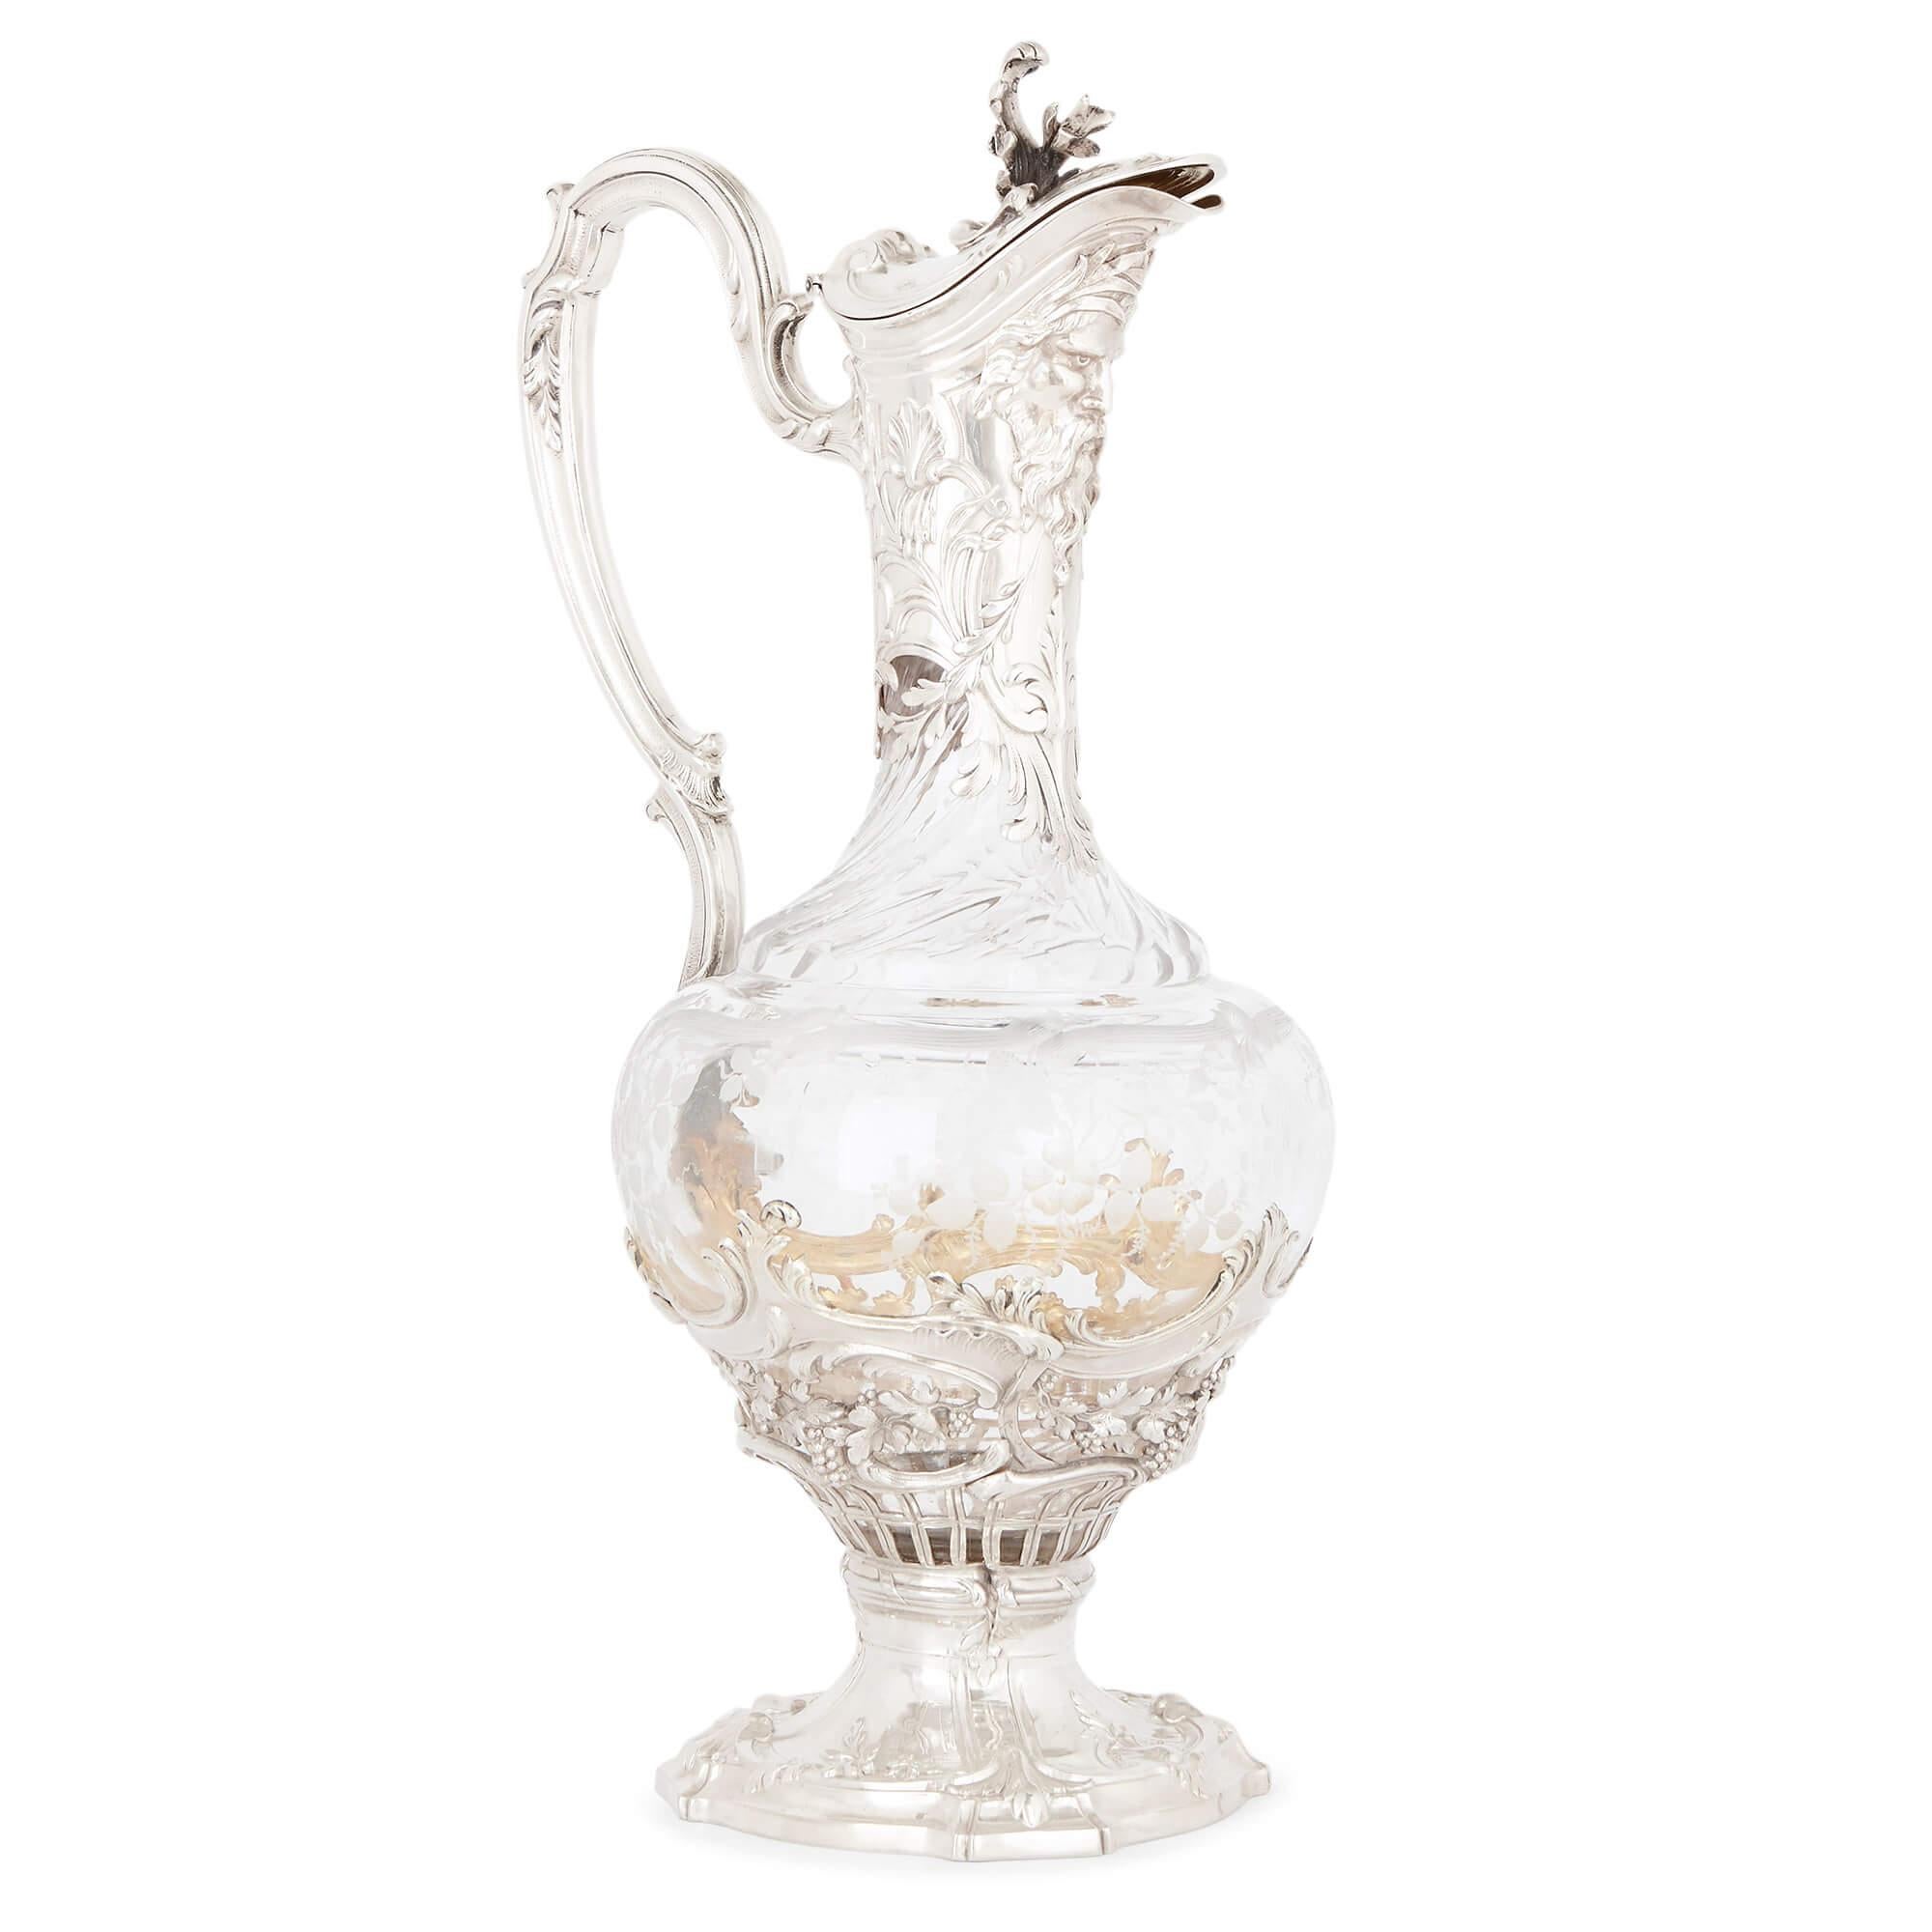 The House of Puiforcat has been one of the most esteemed names in silversmithing since the mid-19th century, when its founder Emile Puiforcat (1857-1927), the maker of this wonderful pair of decanters, established the company as a pre-eminent maker